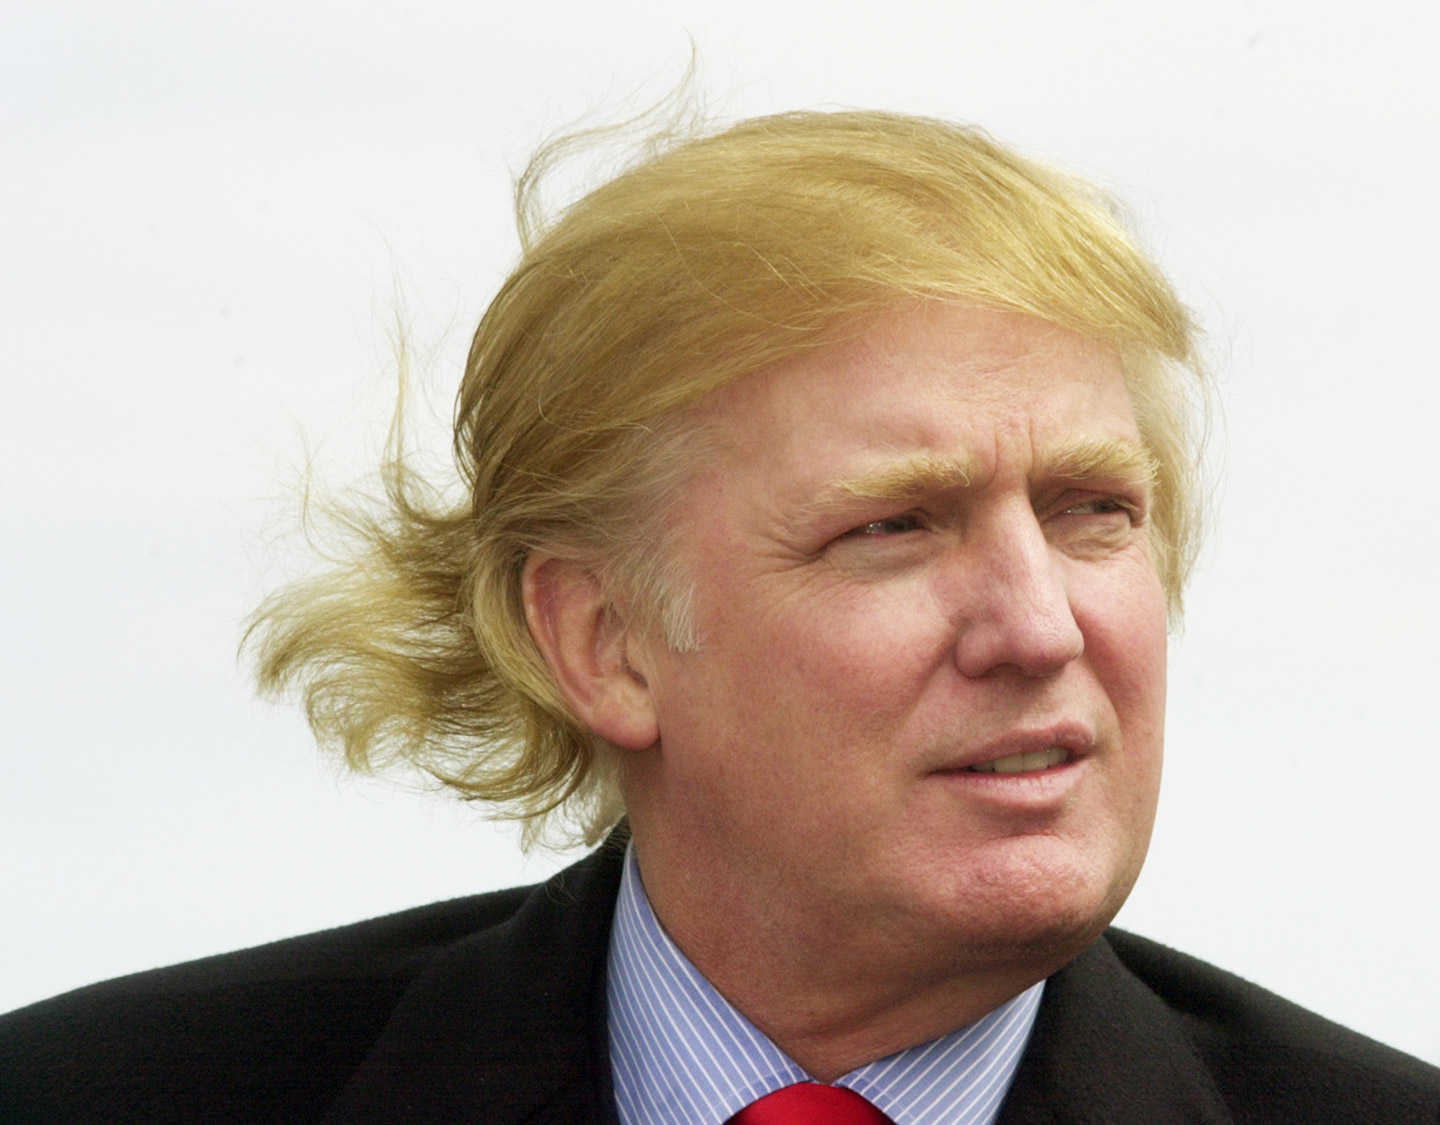 Trump's comb-over and the psychology of male hairstyles